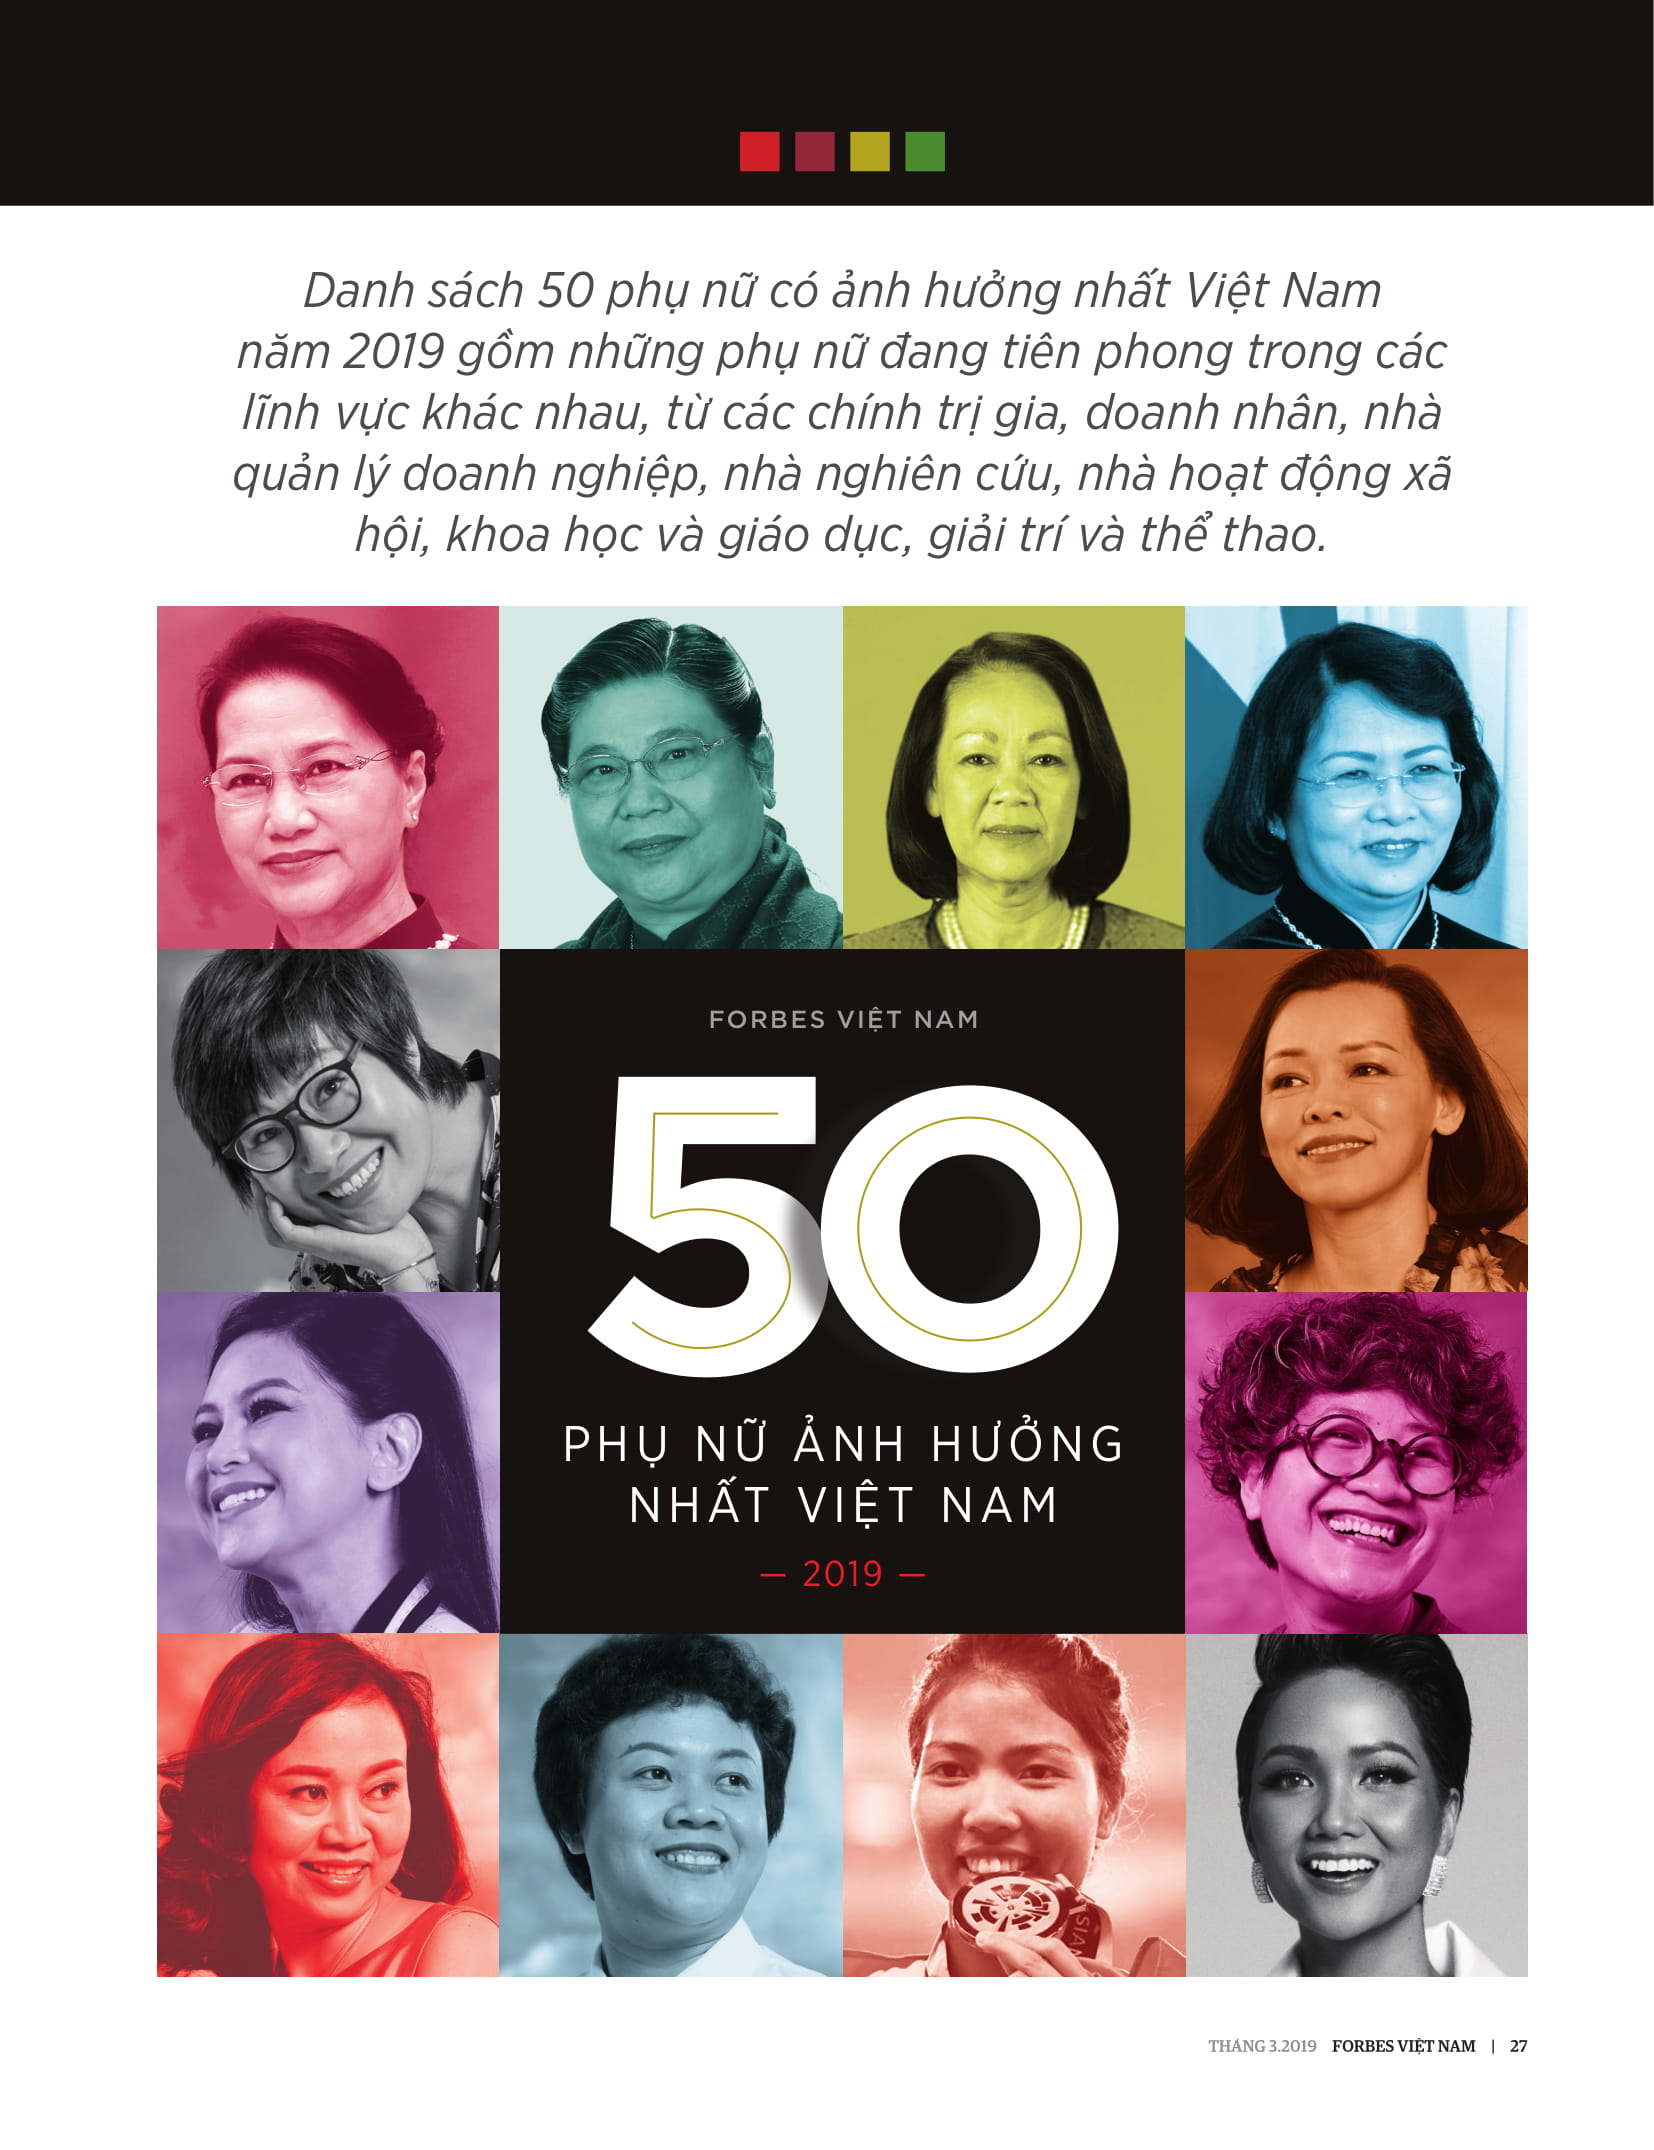 hhen nie duoc vinh danh trong top 50 phu nu anh huong nhat vn 2019